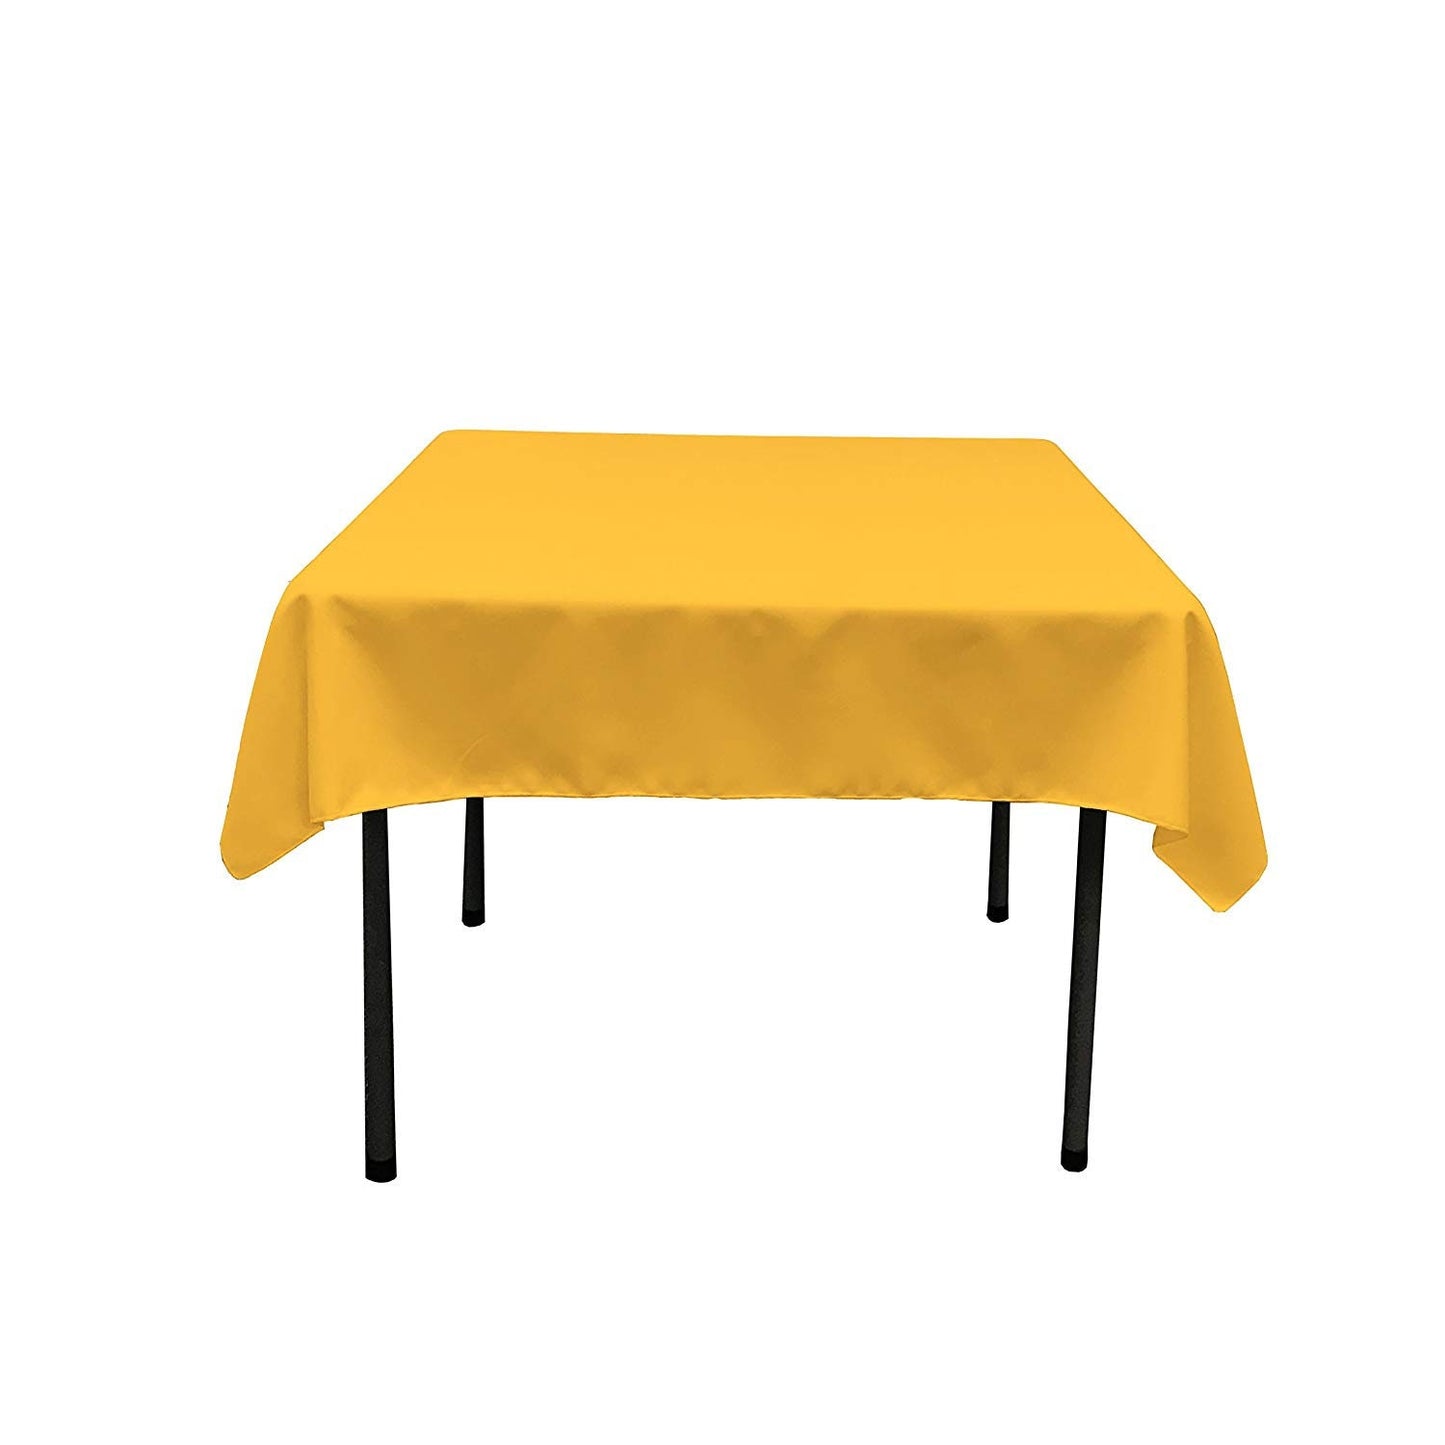 54 x 54-Inch Seamless Dk Yellow Rectangular Polyester Tablecloth for Wedding Party Decorations Square Table Cloth Cover